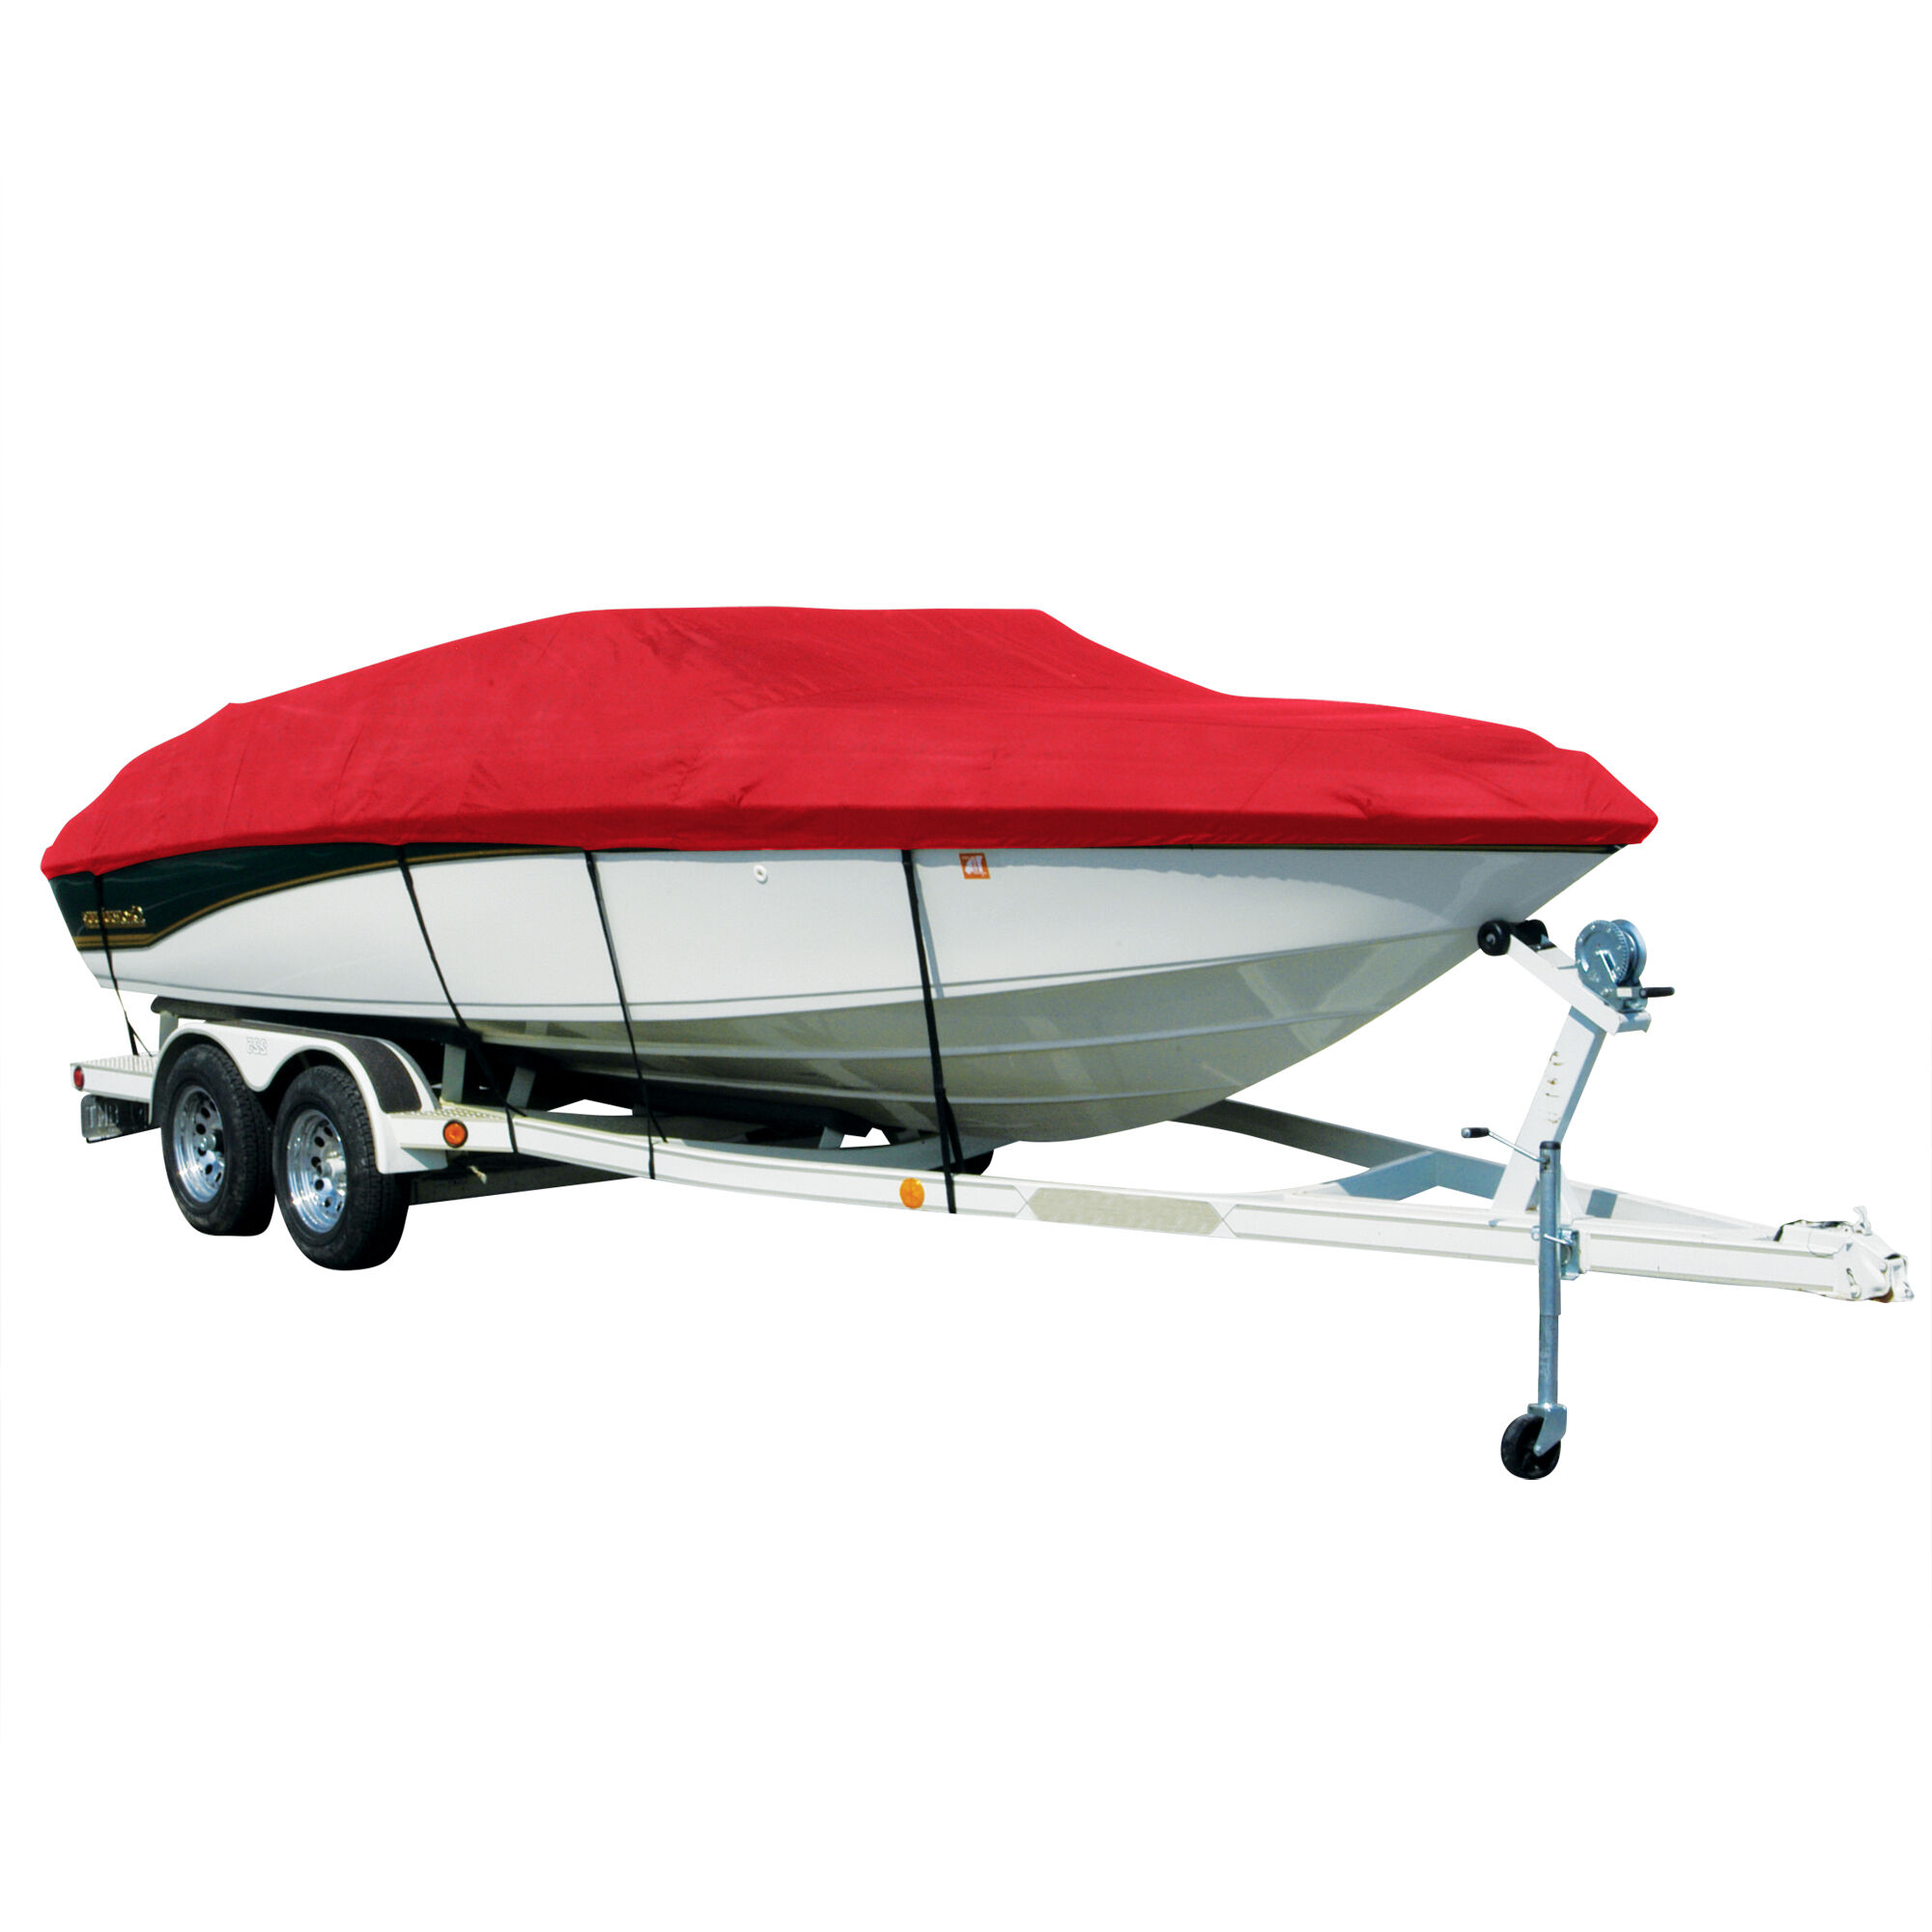 Covermate Exact Fit Sharkskin Boat Cover For Bayliner CAPRI 2002 CJ CUDDY in Red Polyester